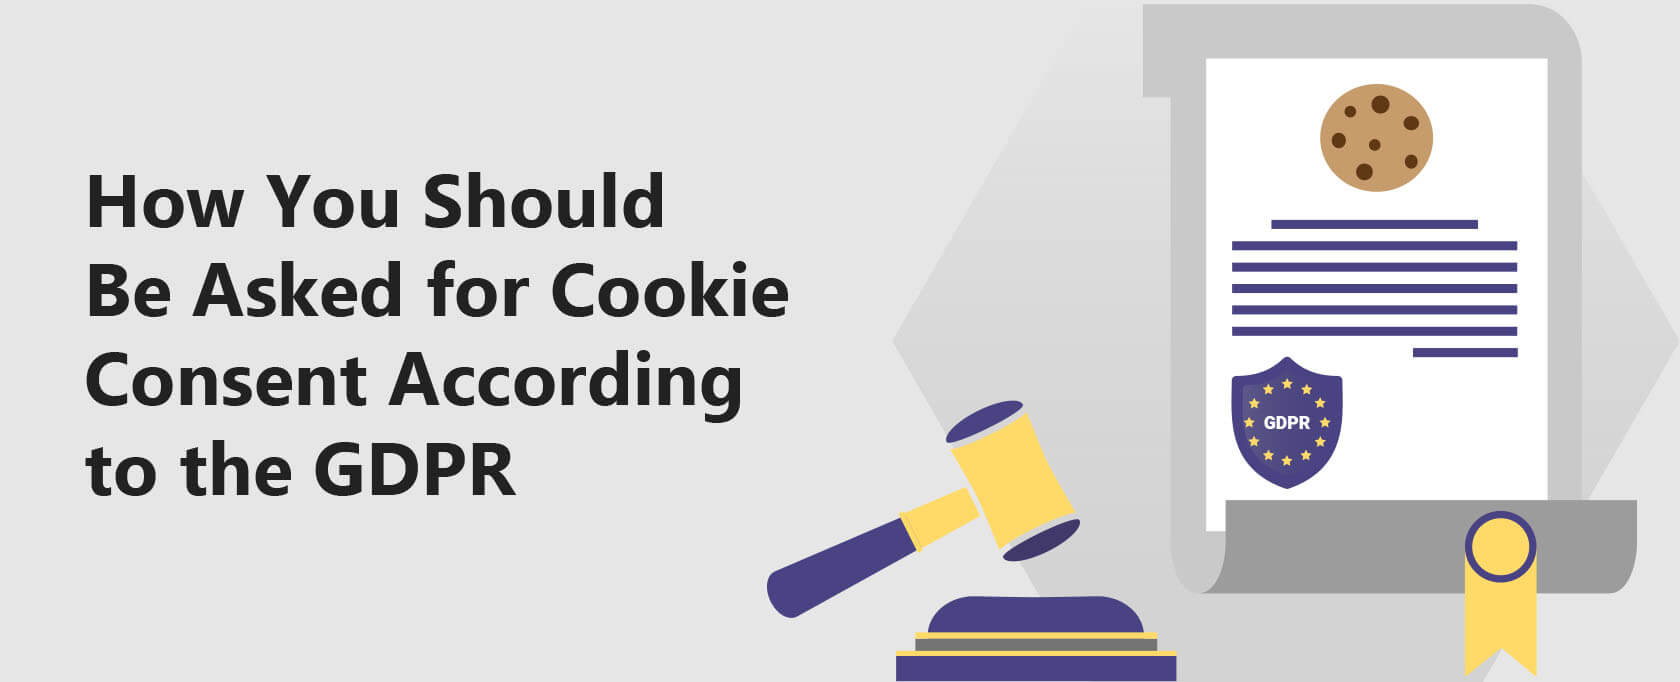 How You Should Be Asked for Cookie Consent According to the GDPR